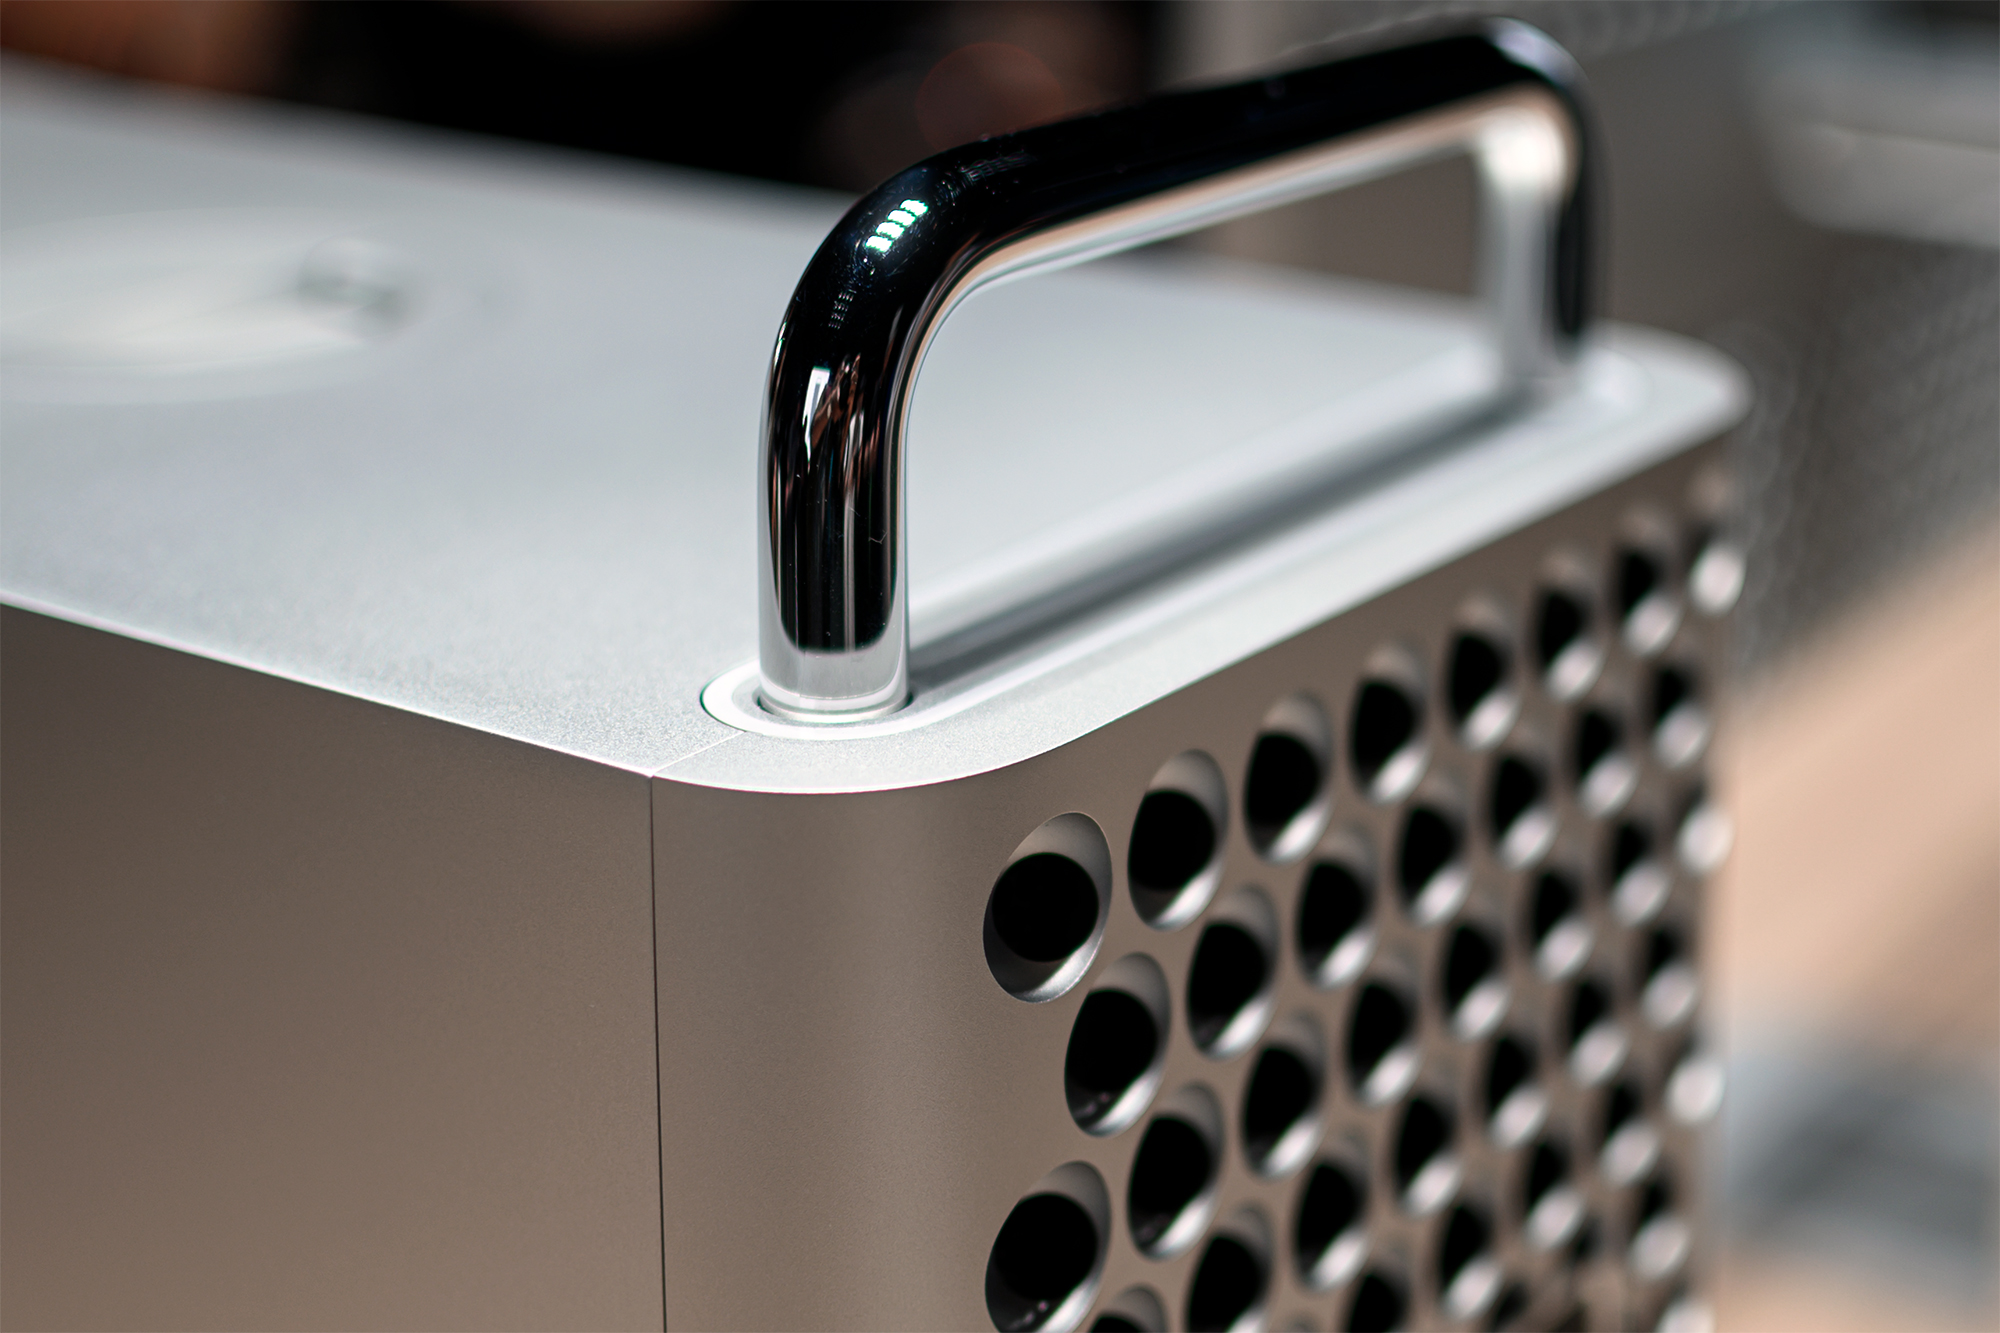 The Mac Pro Afterburner Card: What Is It, and What Does It Do